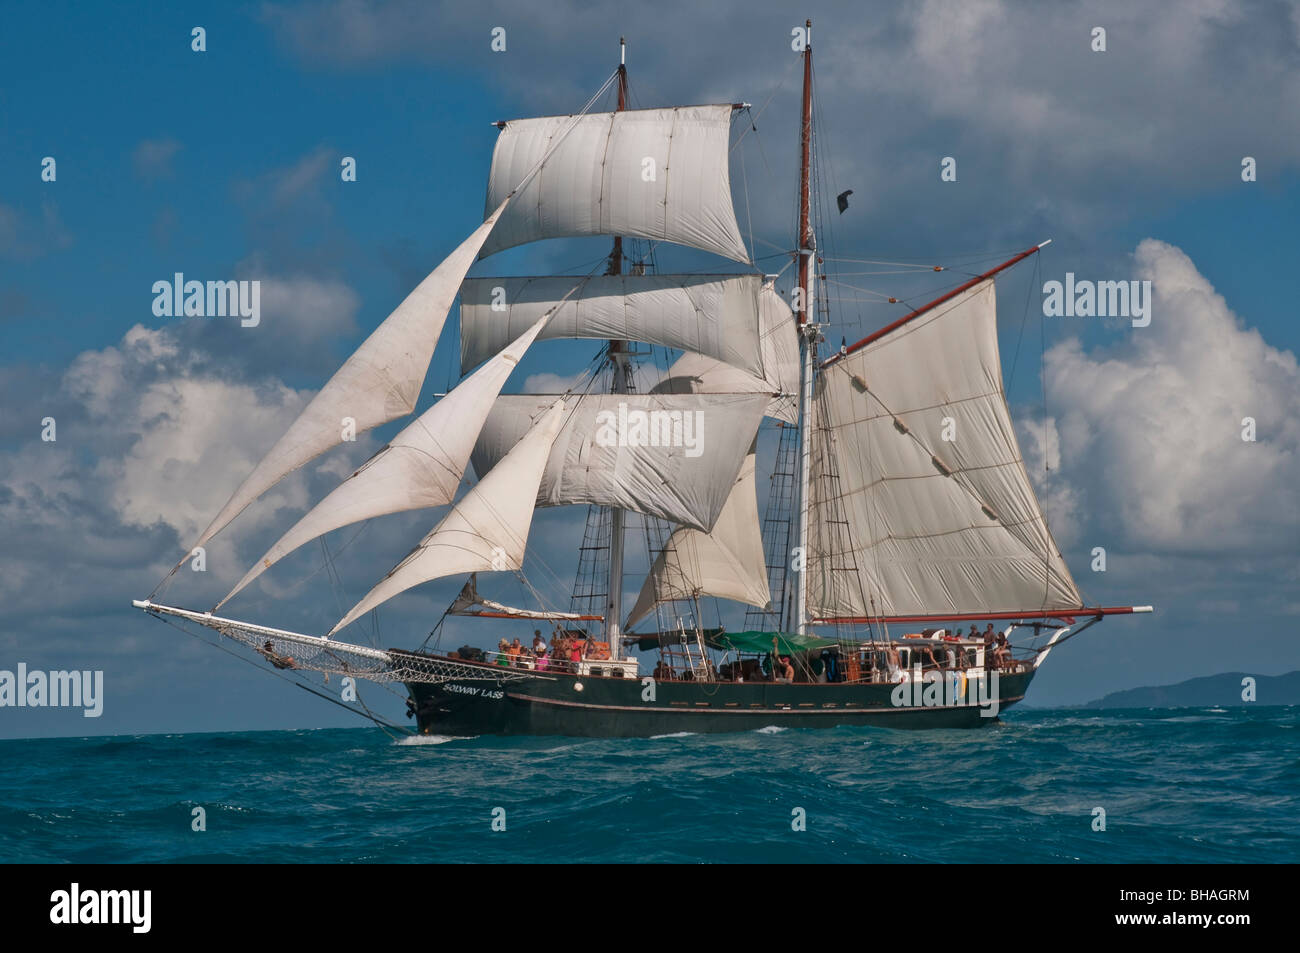 The Solway Lass 125 foot schooner built in 1906 sailing in the Whitsunday Islands on the Great Barrier Reef Stock Photo